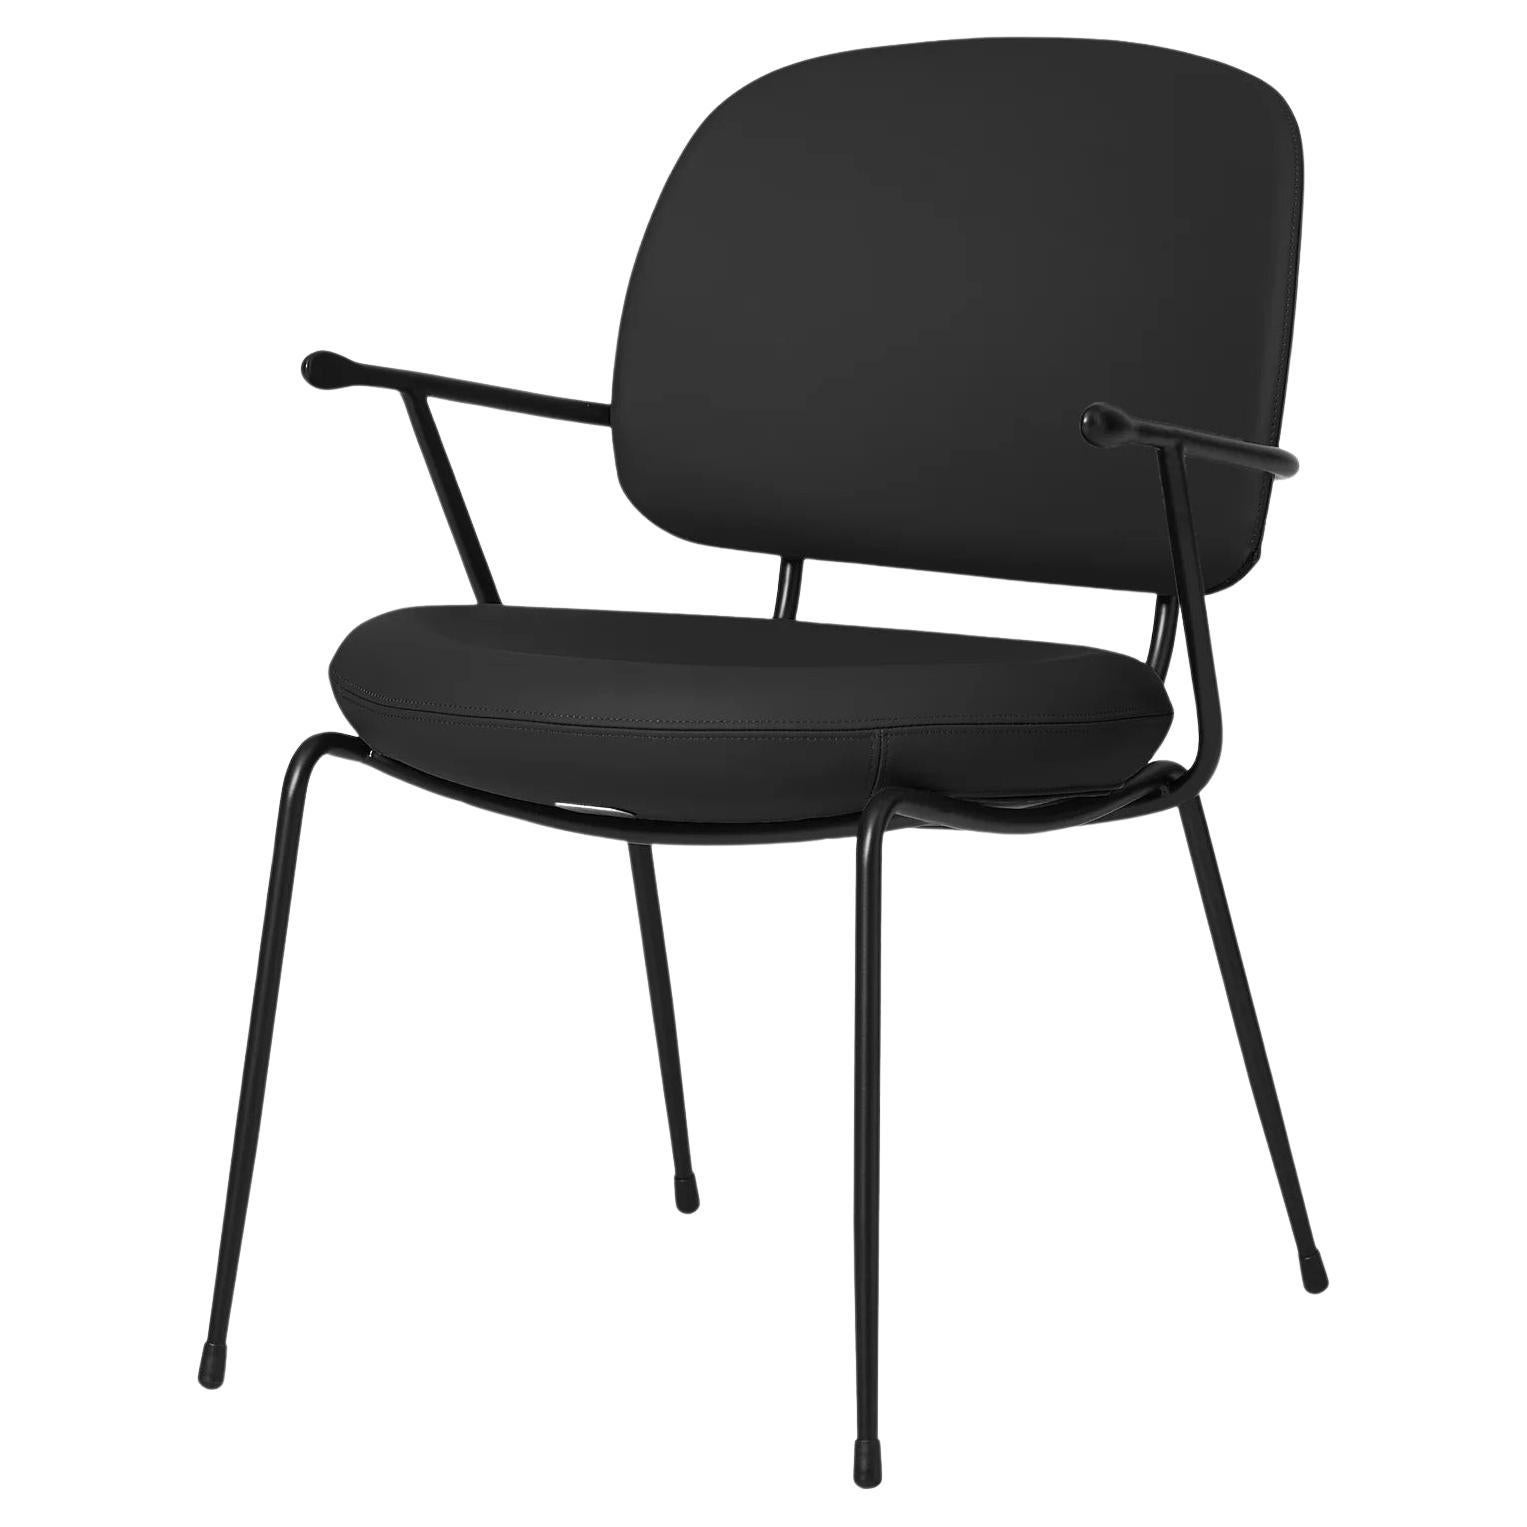 Steel And Bellagio Black Leather Lounge Chair, Industry  For Sale